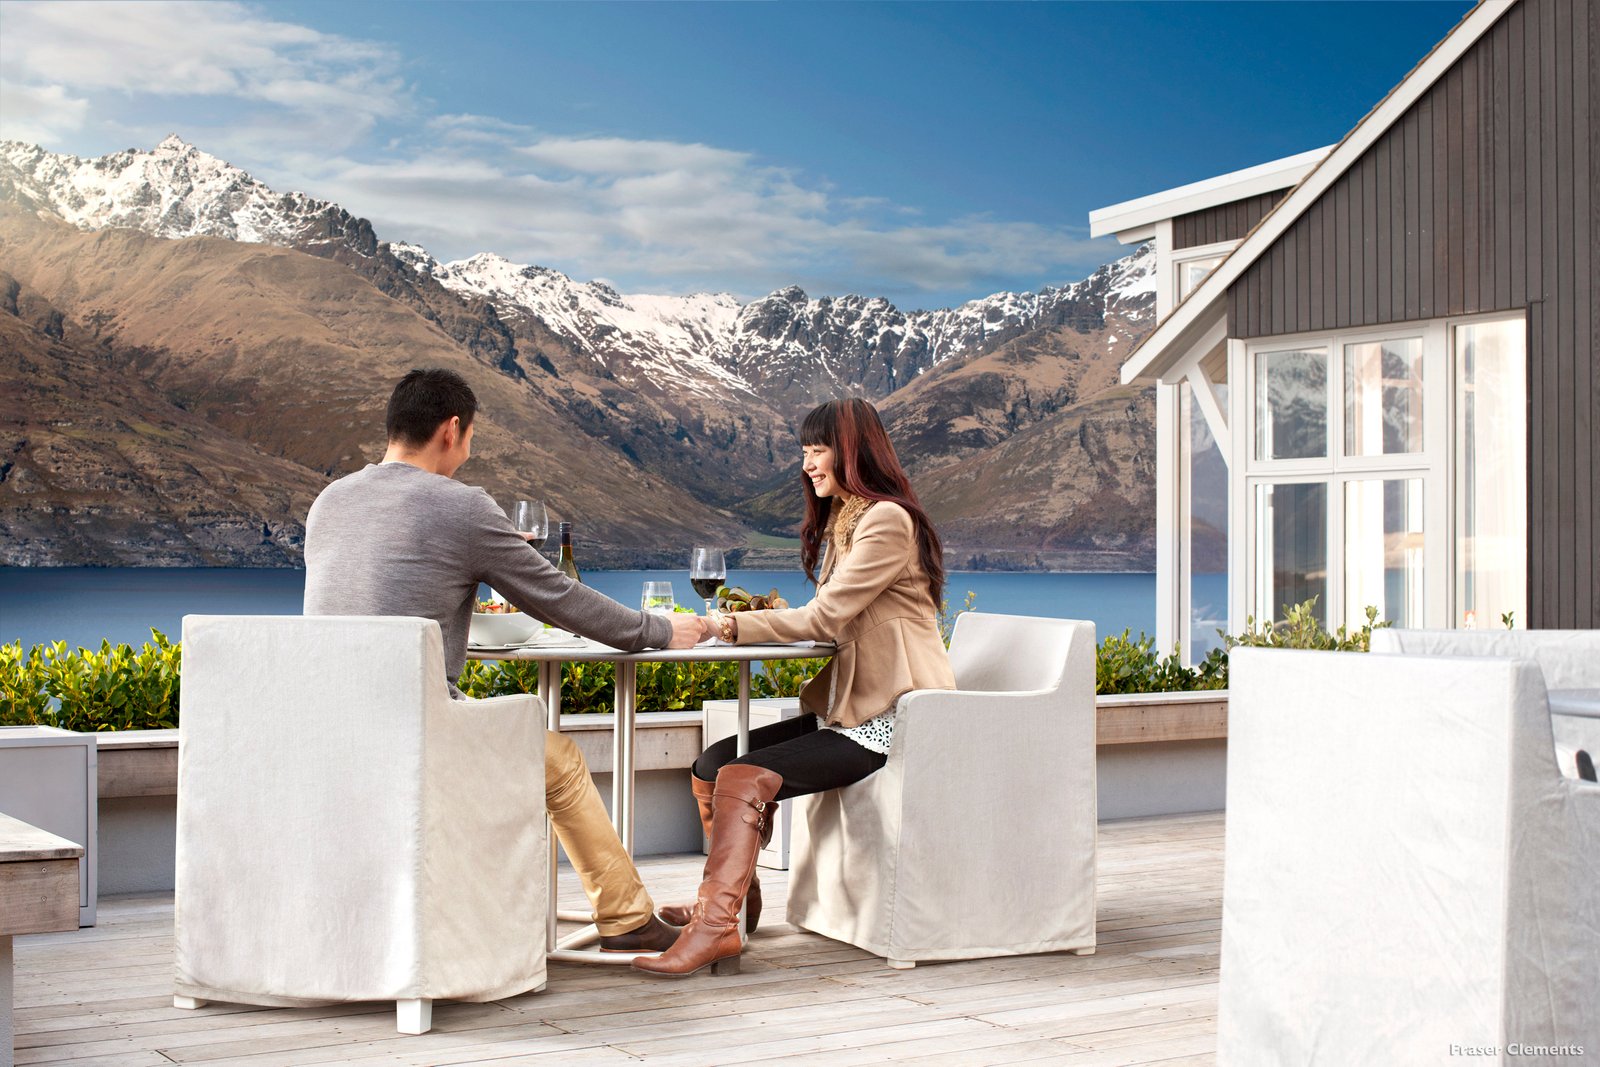 Have a Royal Time in New Zealand’s Royal Residences